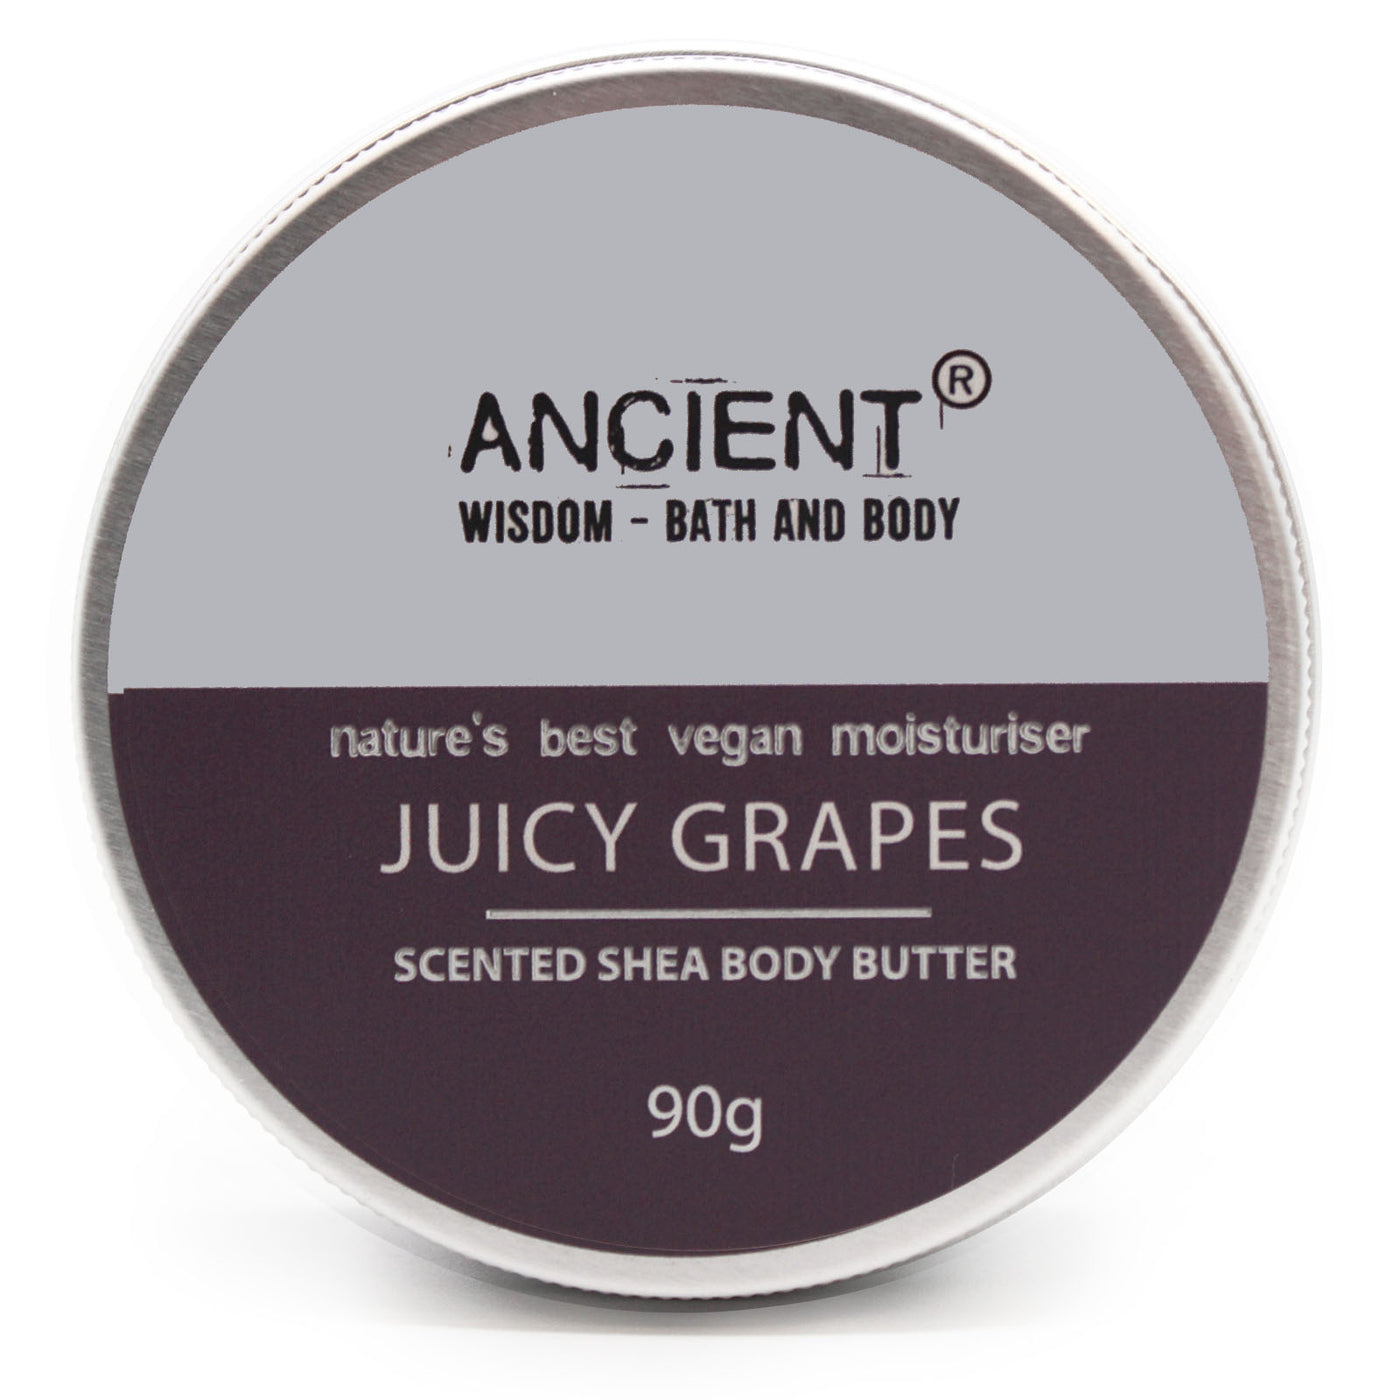 Paraben Free Scented Shea Body Butter - Juicy Grape 90g.